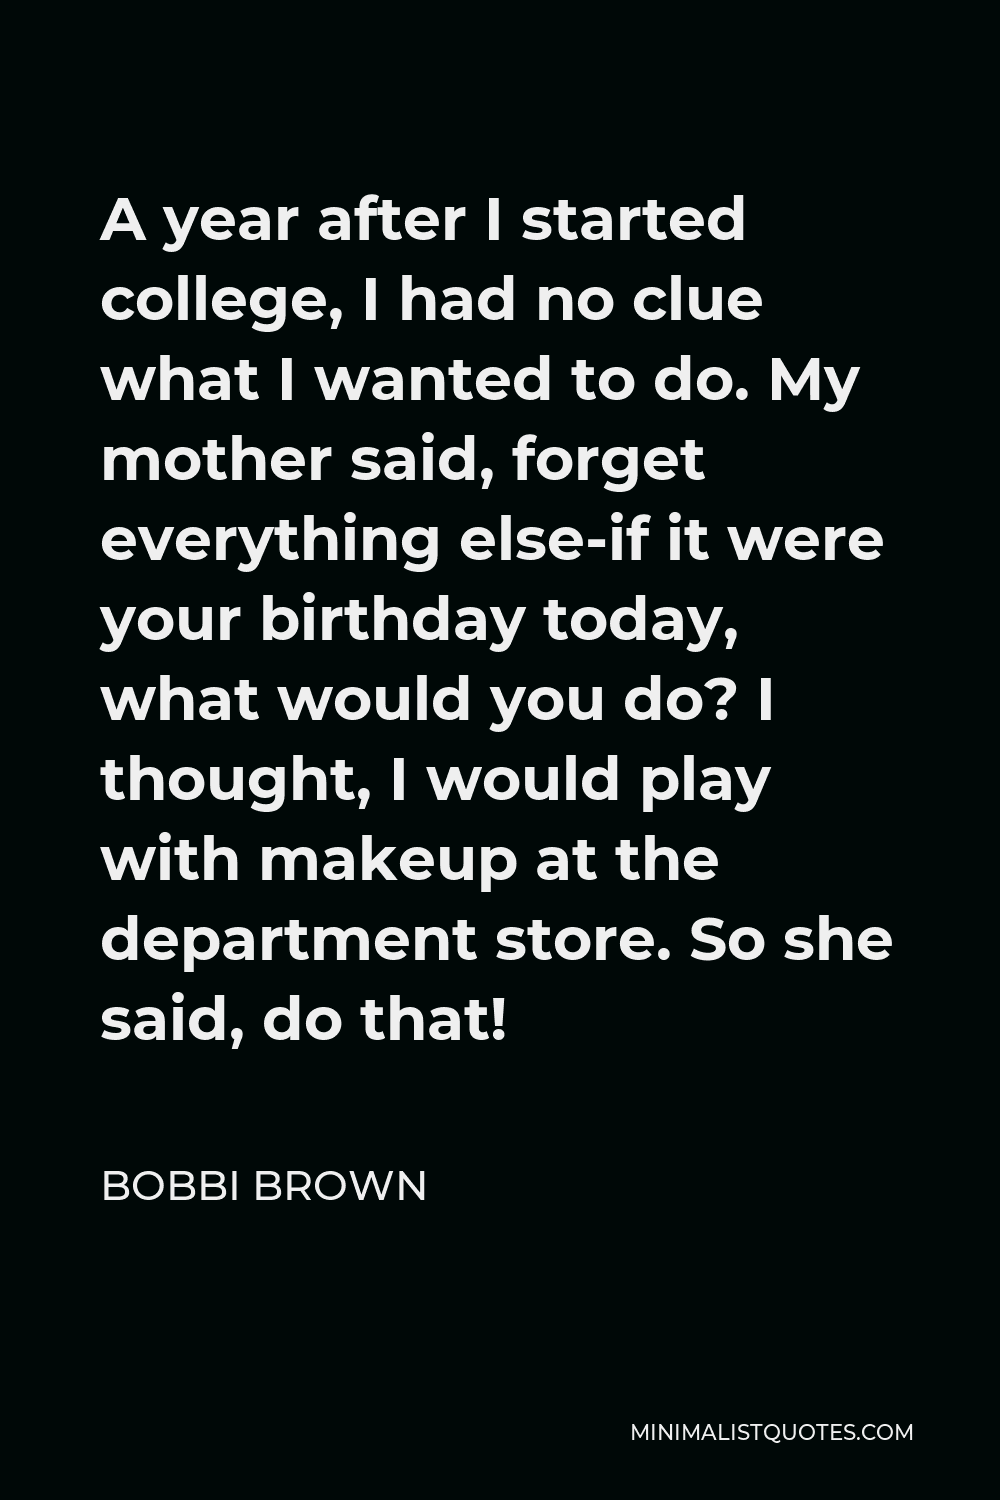 Bobbi Brown Quote - A year after I started college, I had no clue what I wanted to do. My mother said, forget everything else-if it were your birthday today, what would you do? I thought, I would play with makeup at the department store. So she said, do that!